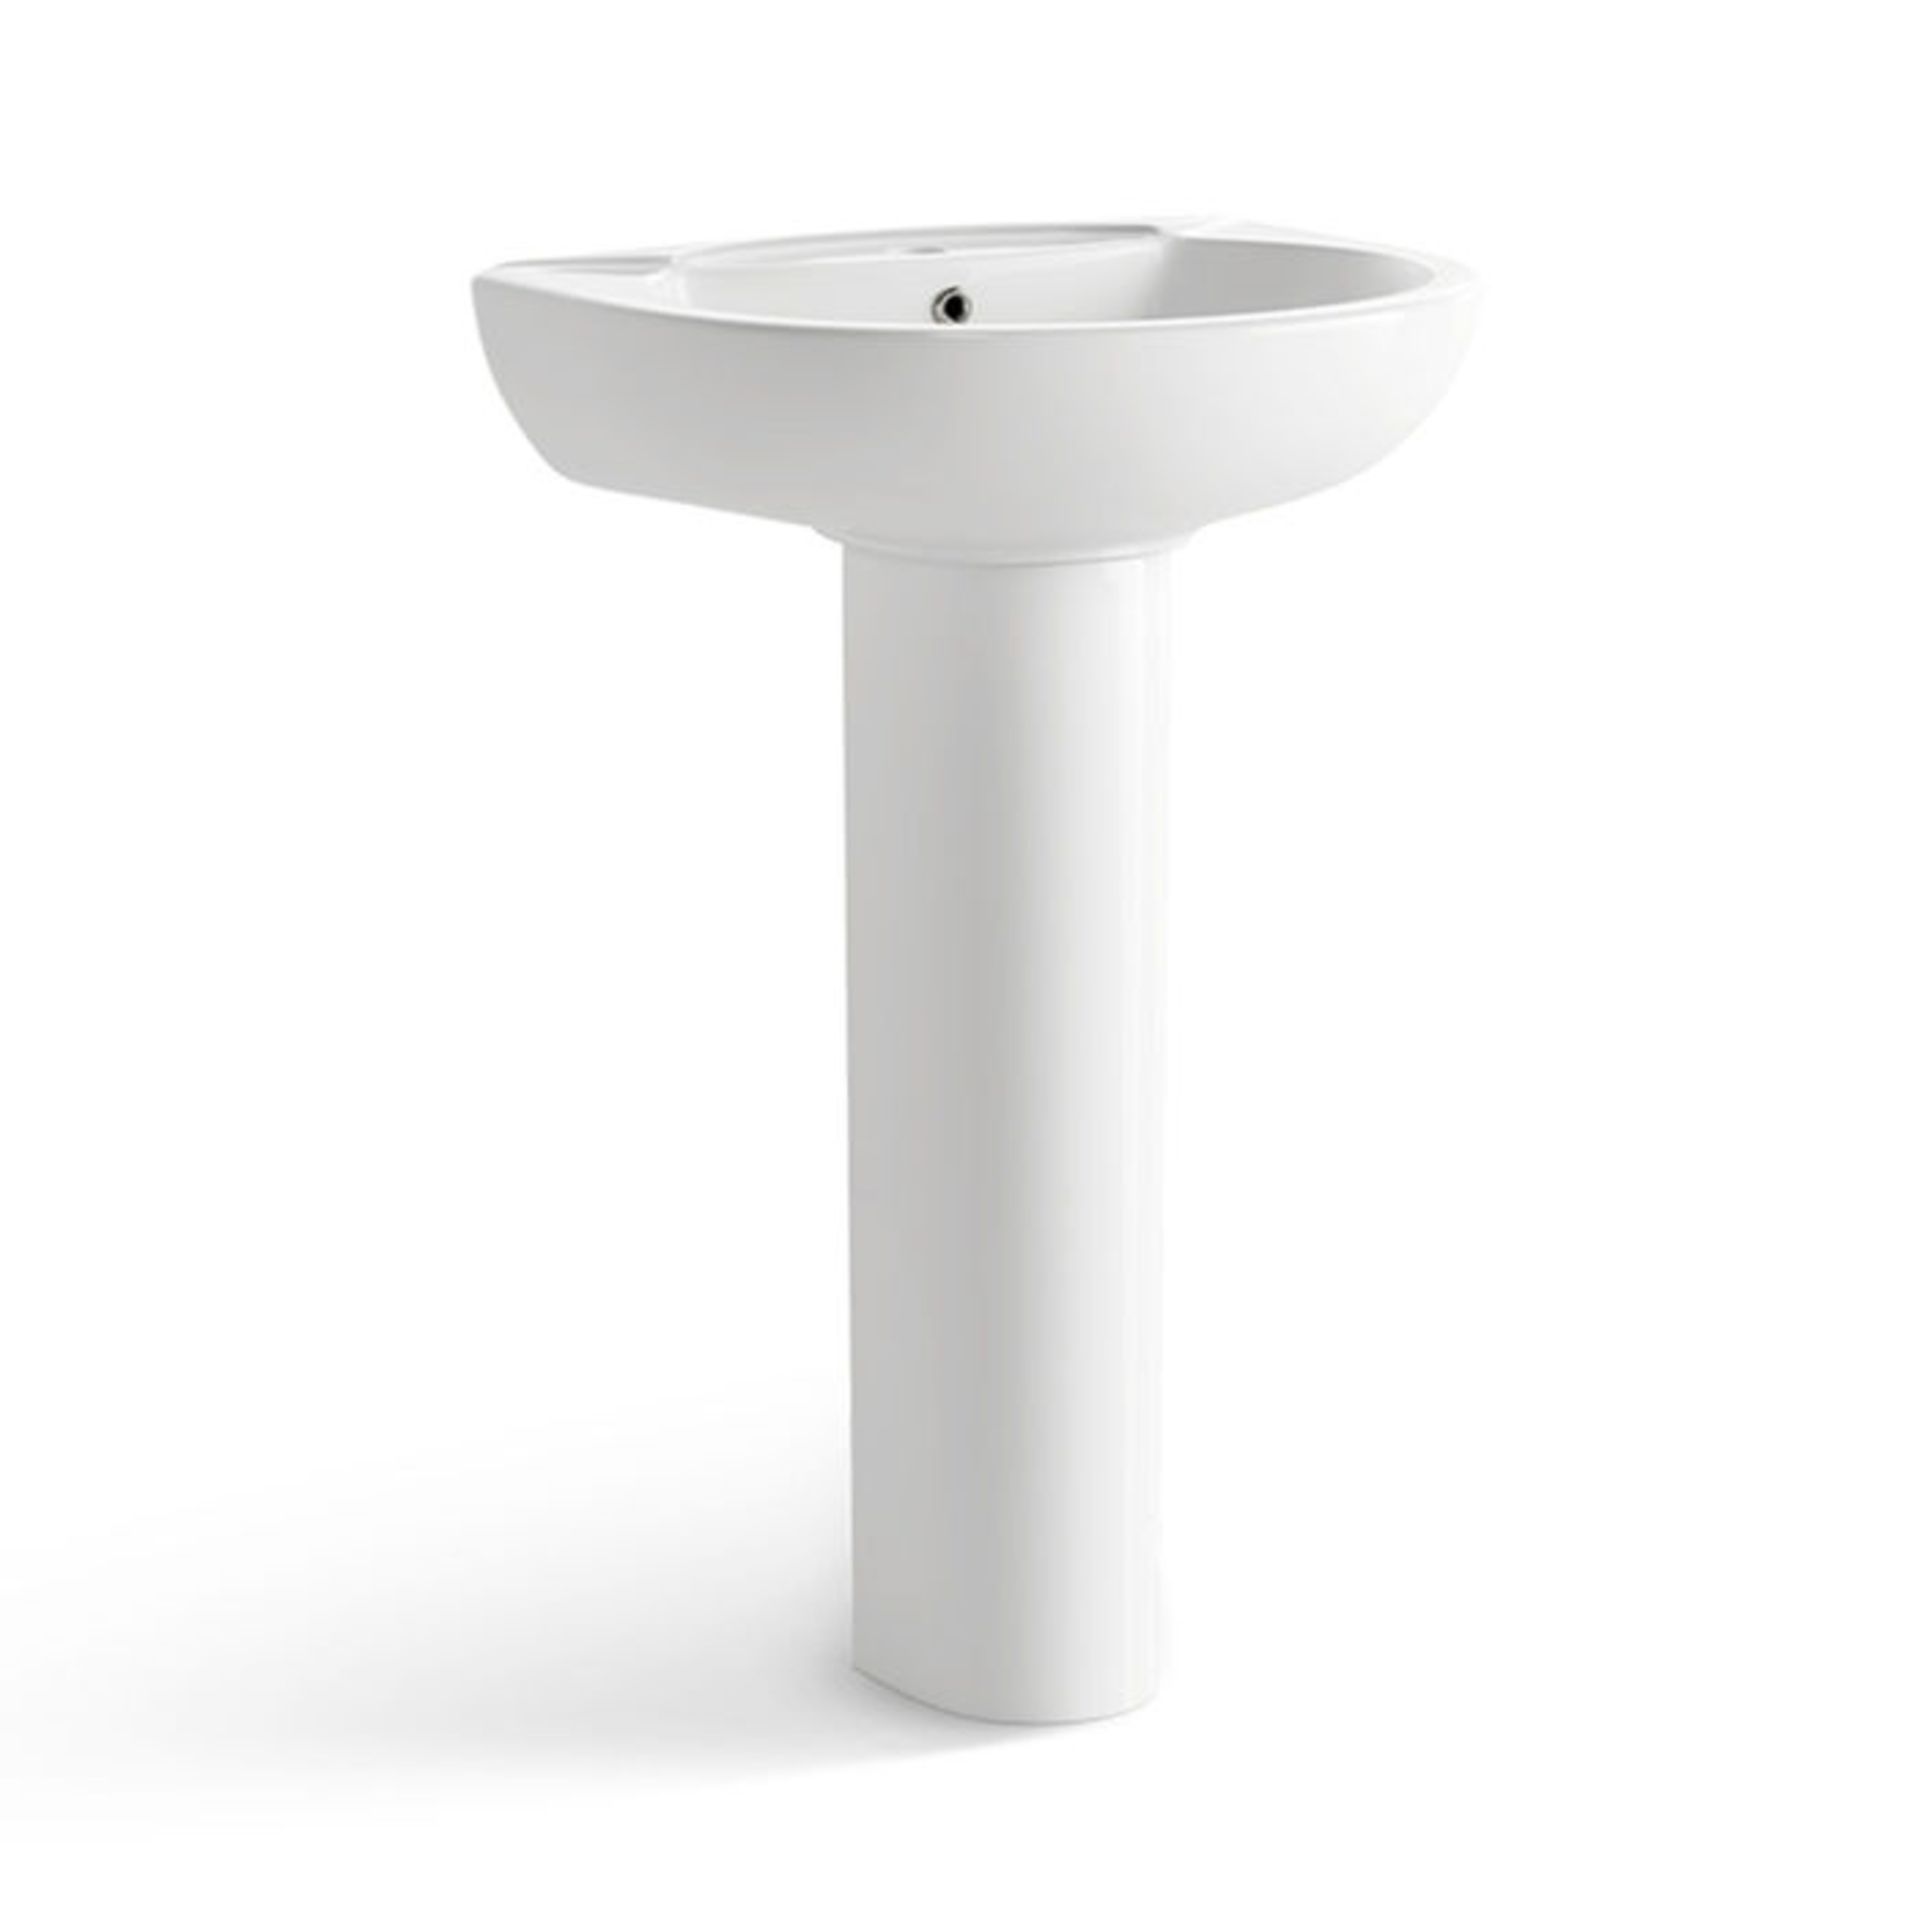 Quartz Sink & Pedestal - Single Tap Hole. Made from White Vitreous China and finished with a high